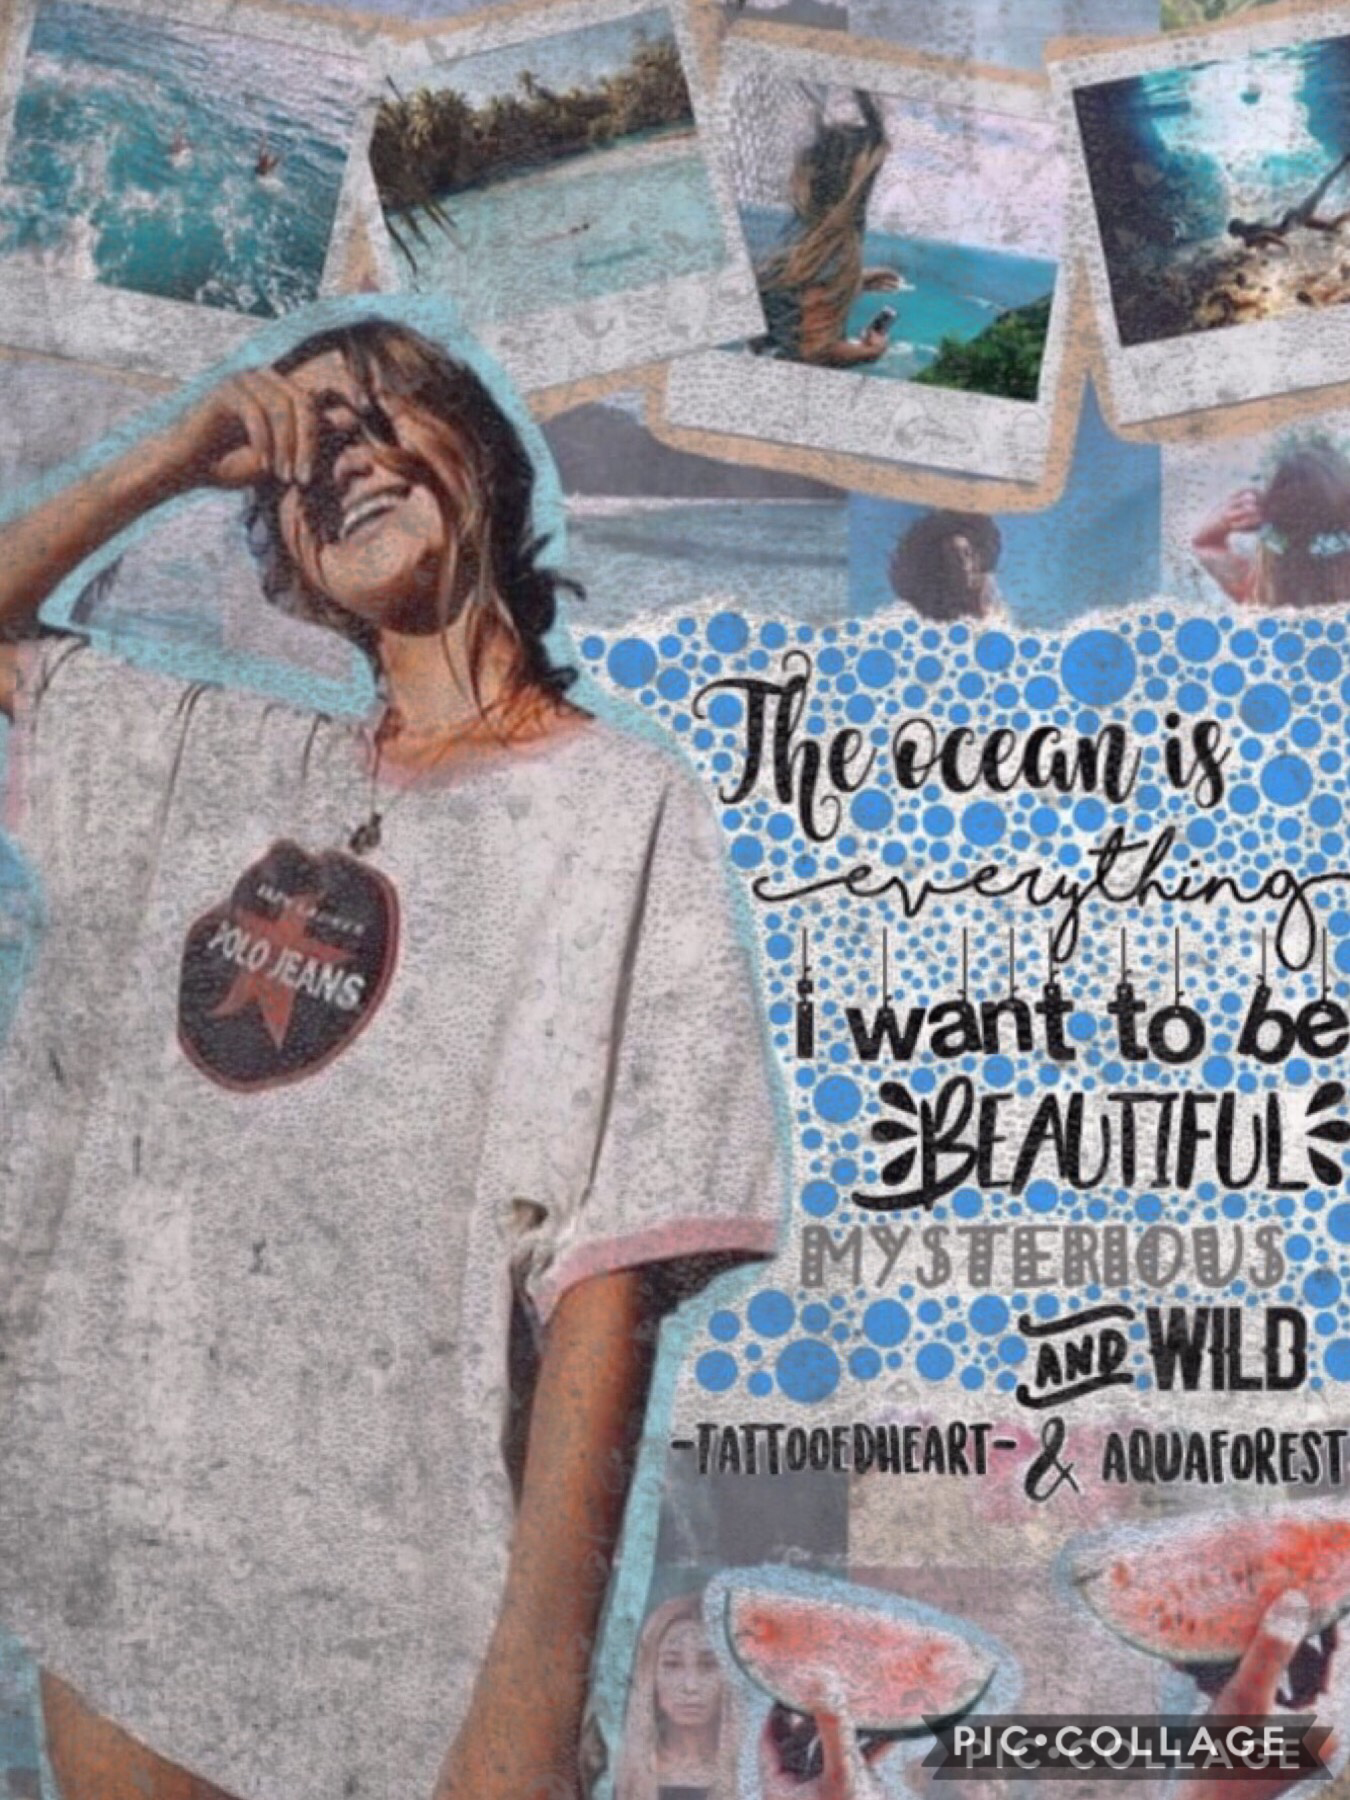 Collab with the amazing.............
-TattooedHeart- !!!
Go follow!
She did the text and I did the background! 
(The background was inspired by clear-blue-water)
